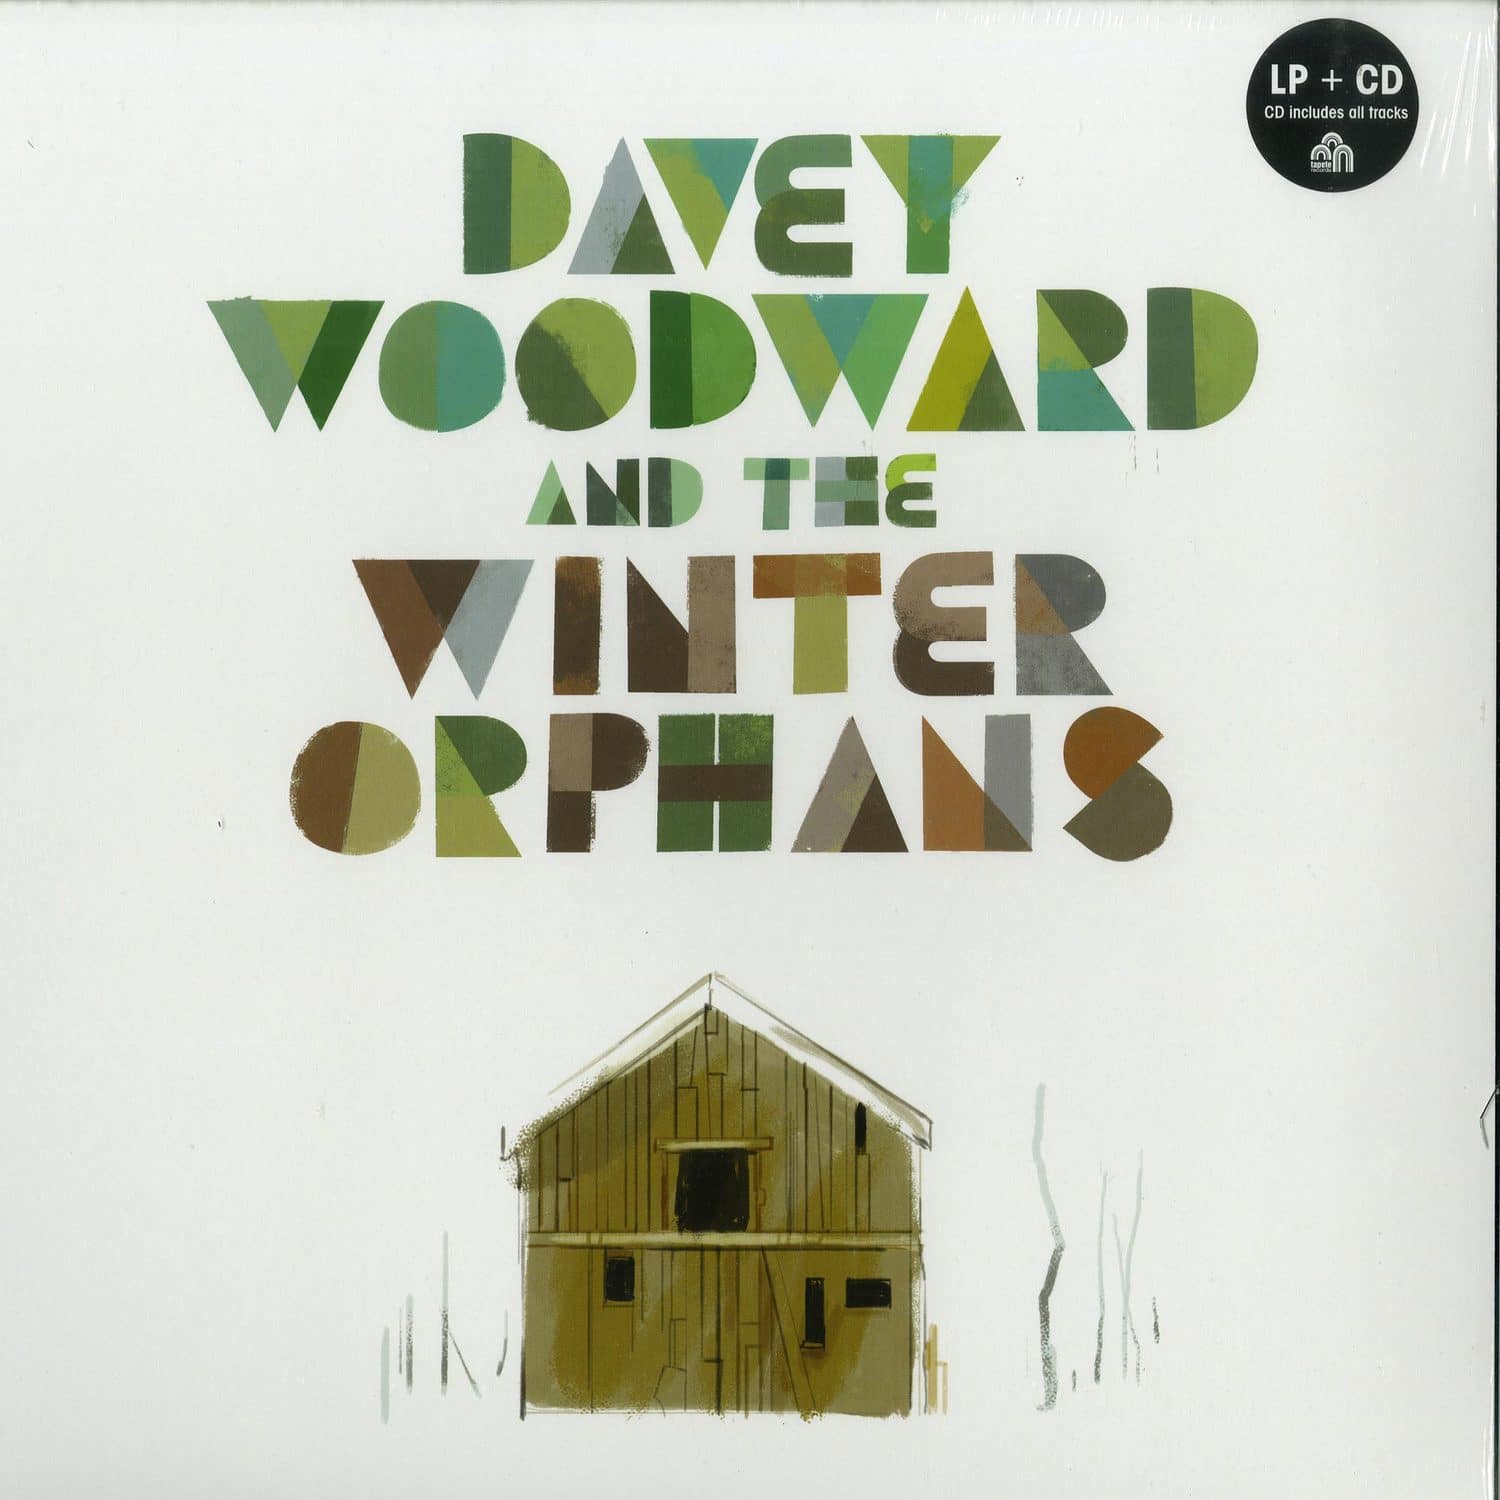 Davey Woodward And The Winter Orphans - DAVEY WOODWARD AND THE WINTER ORPHANS 